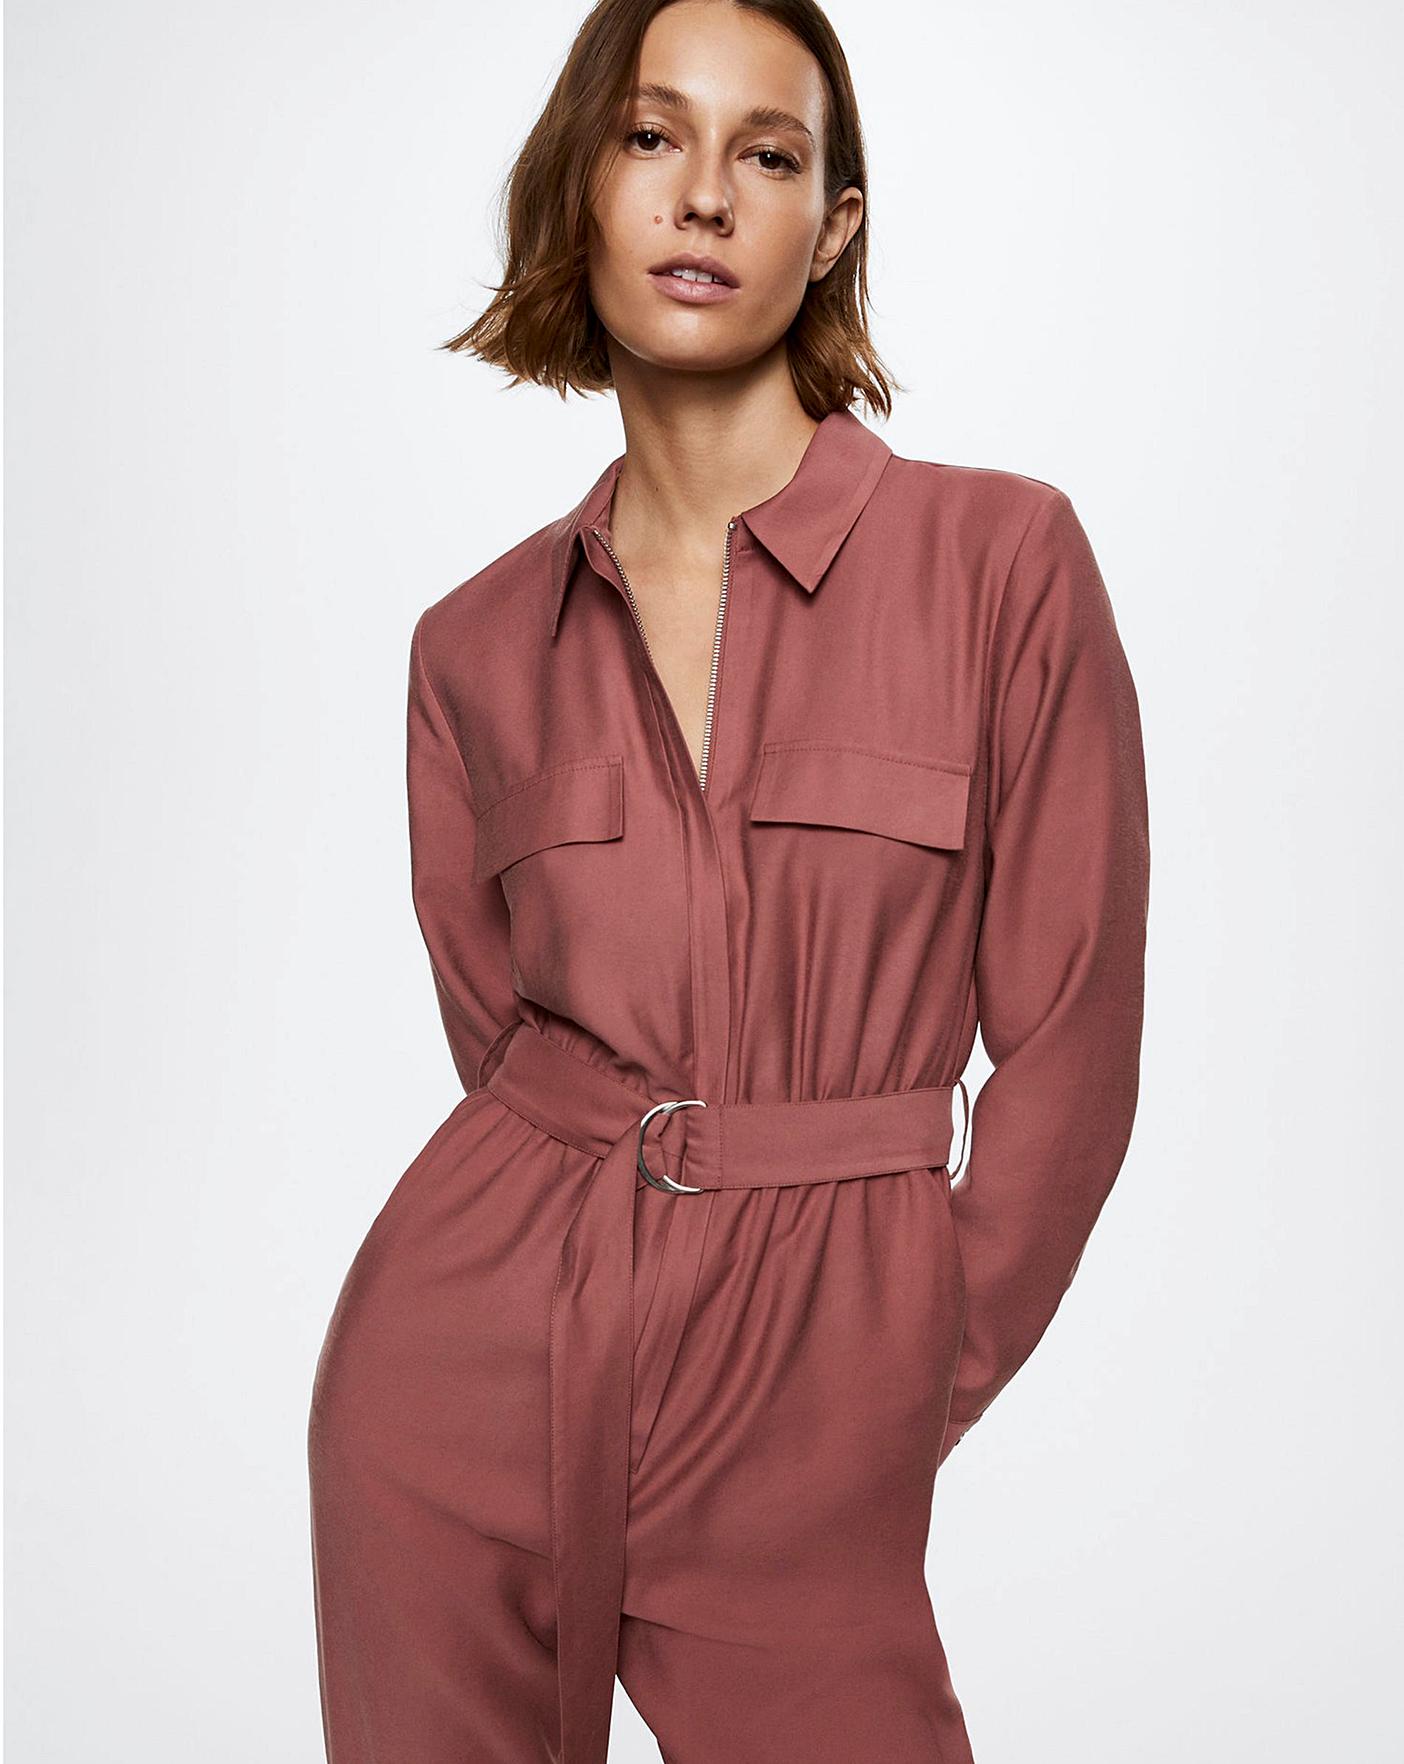 Long jumpsuit with shirt collar